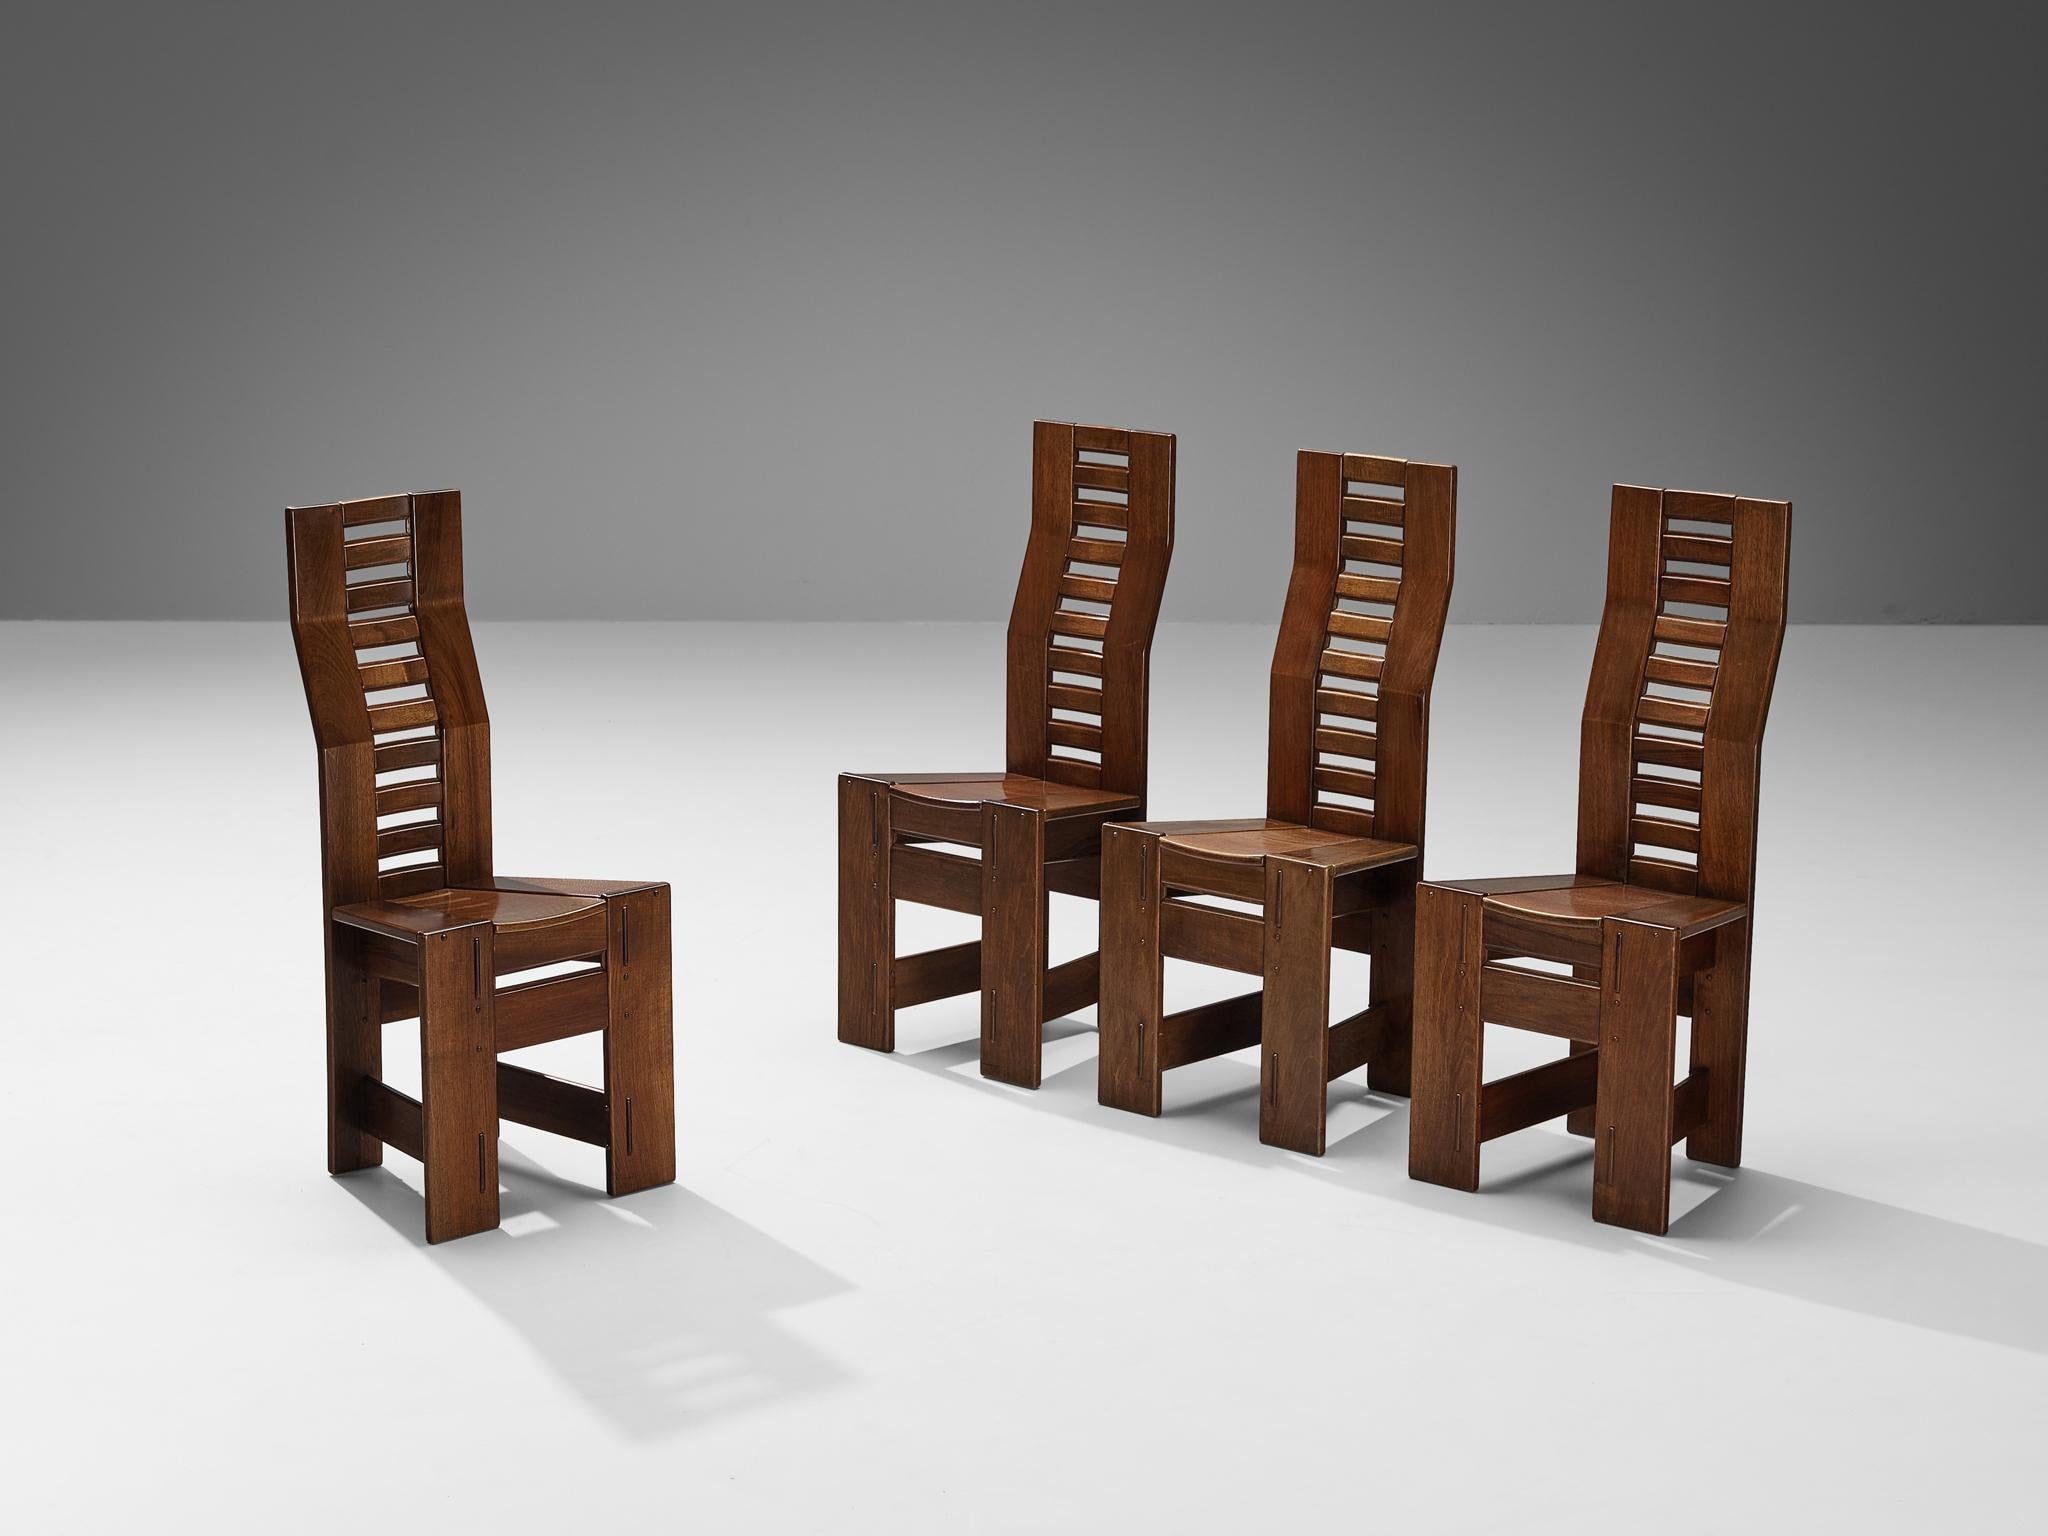 Giuseppe Rivadossi for Officina Rivadossi, set of four dining chairs, walnut, Italy, circa 1980

An exceptional set of chairs by the Italian sculptor and designer Giuseppe Rivadossi, featuring a high level of craftsmanship in woodwork. The chairs